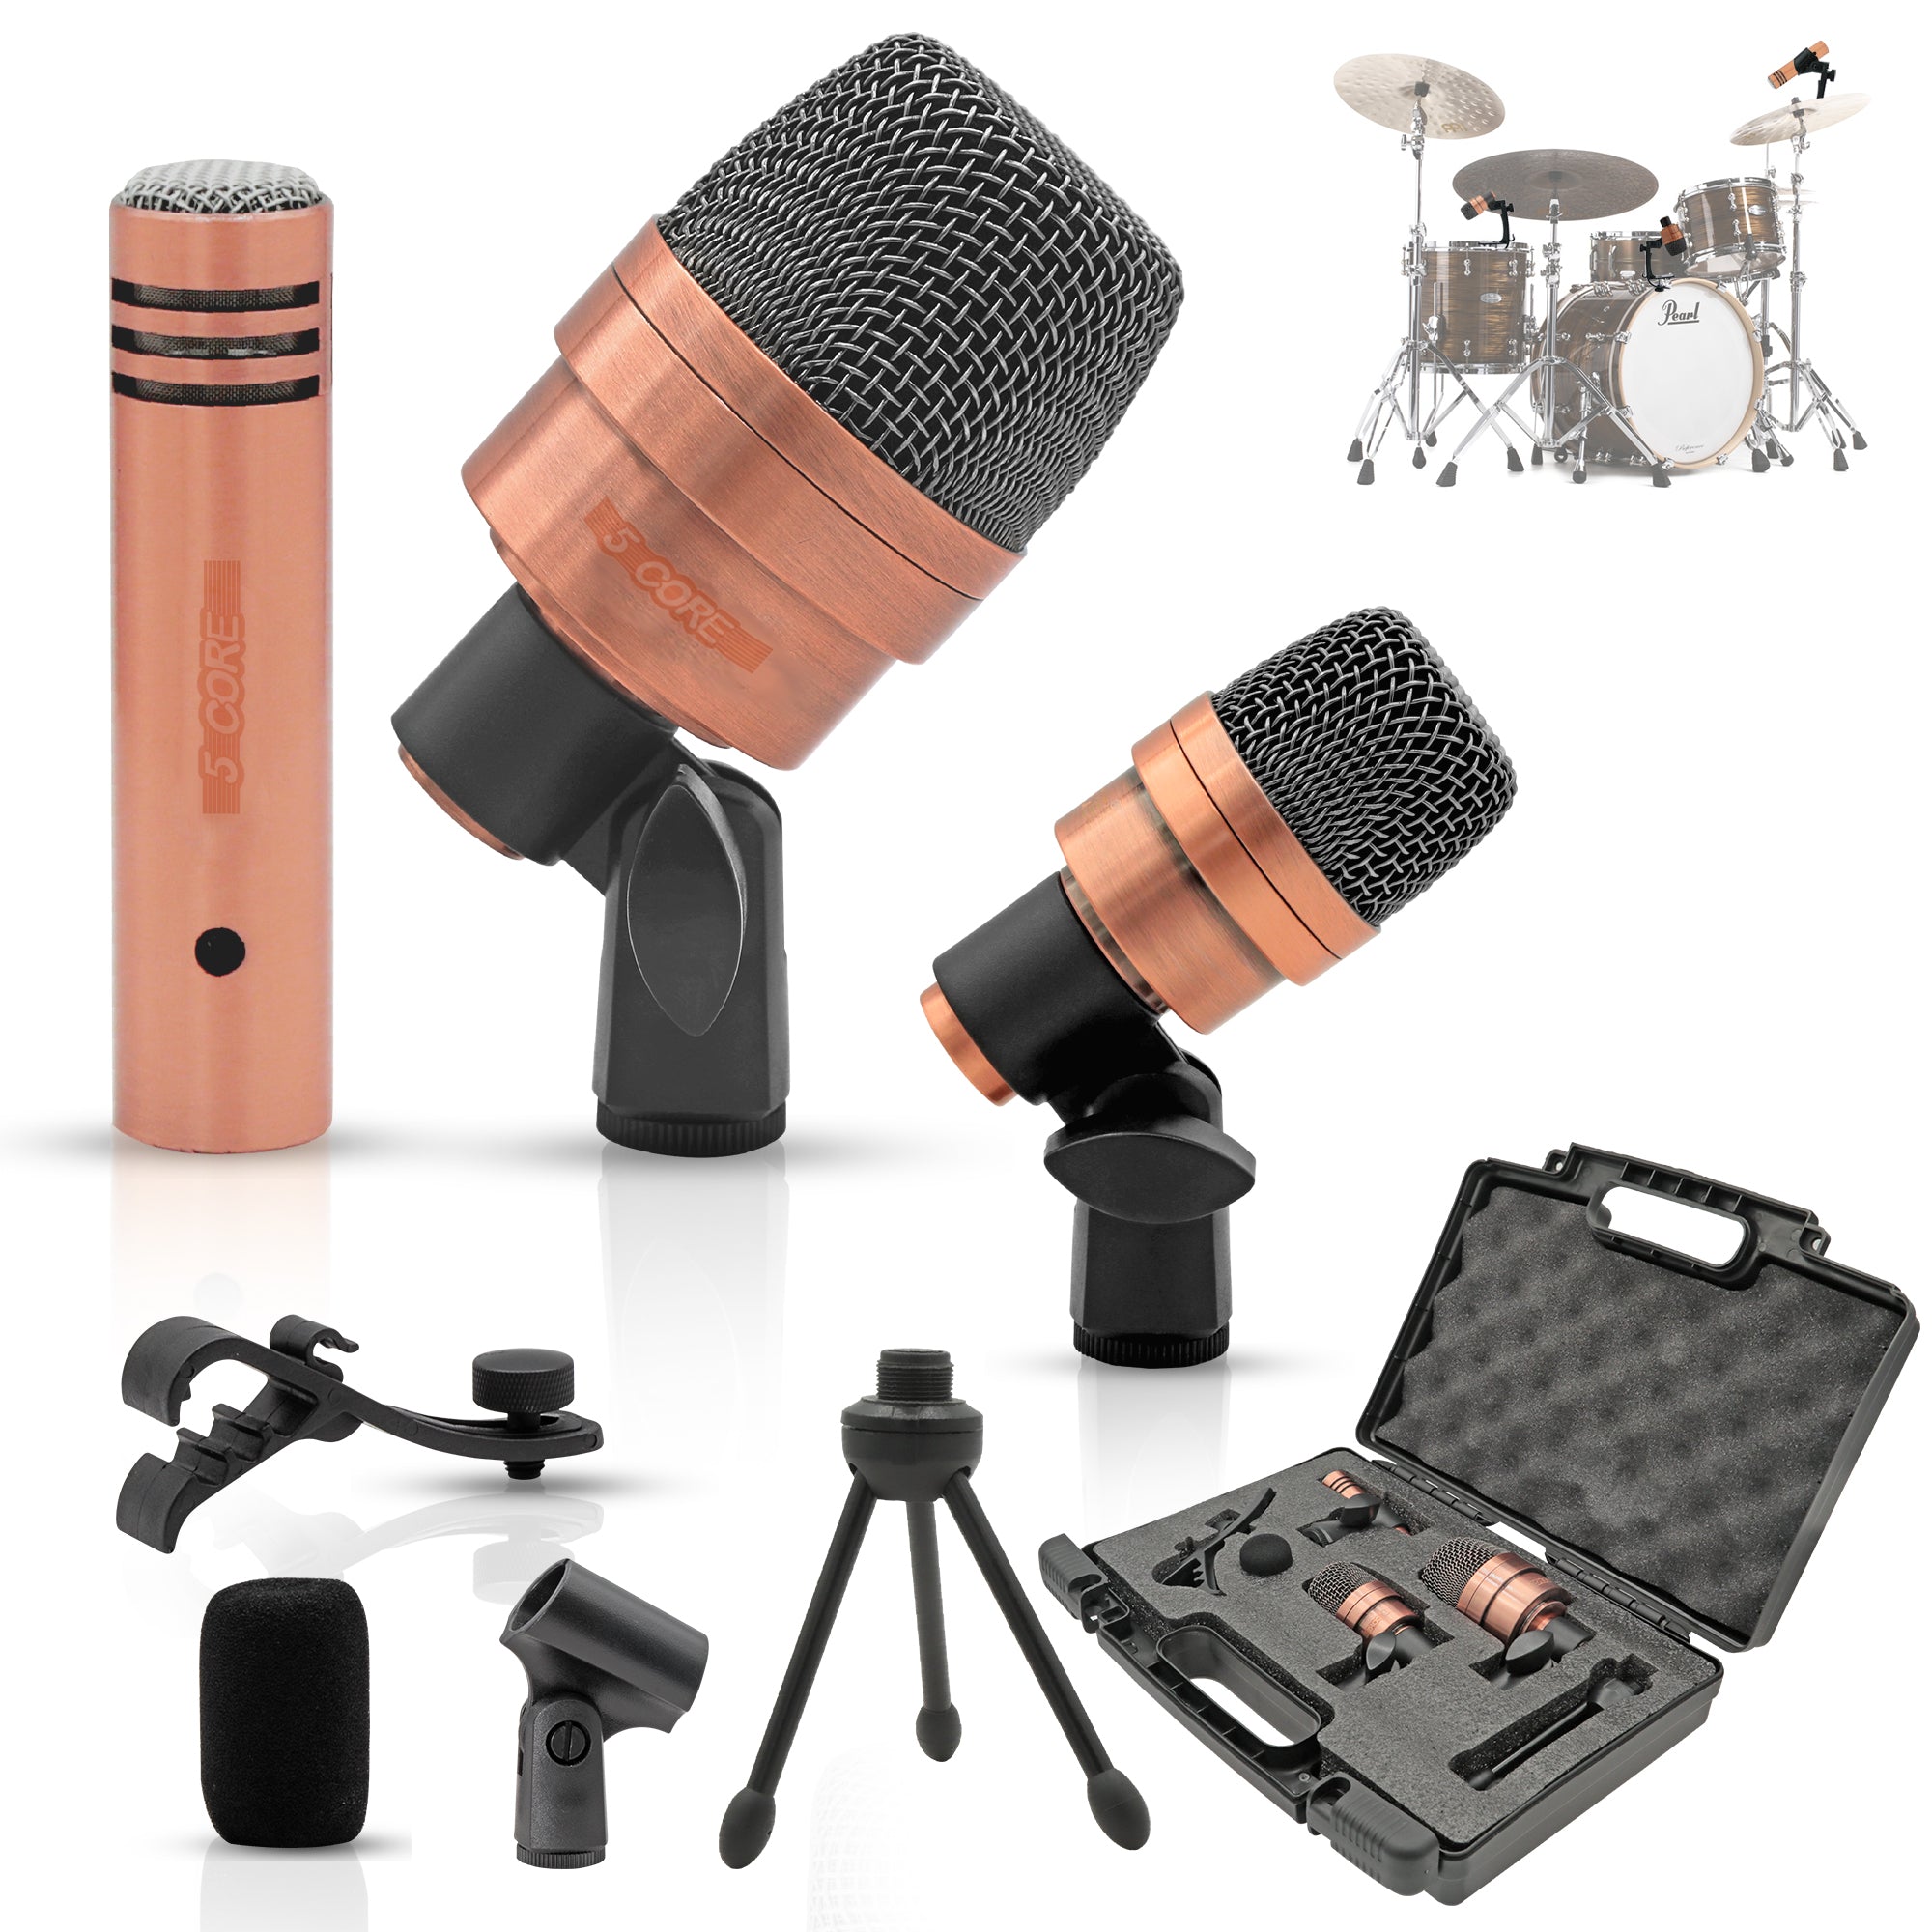 5 Core Drum Mic Kit 3 Piece Dynamic XLR Kick Bass Tom Snare Microphone Set for Drummers Copper Finish